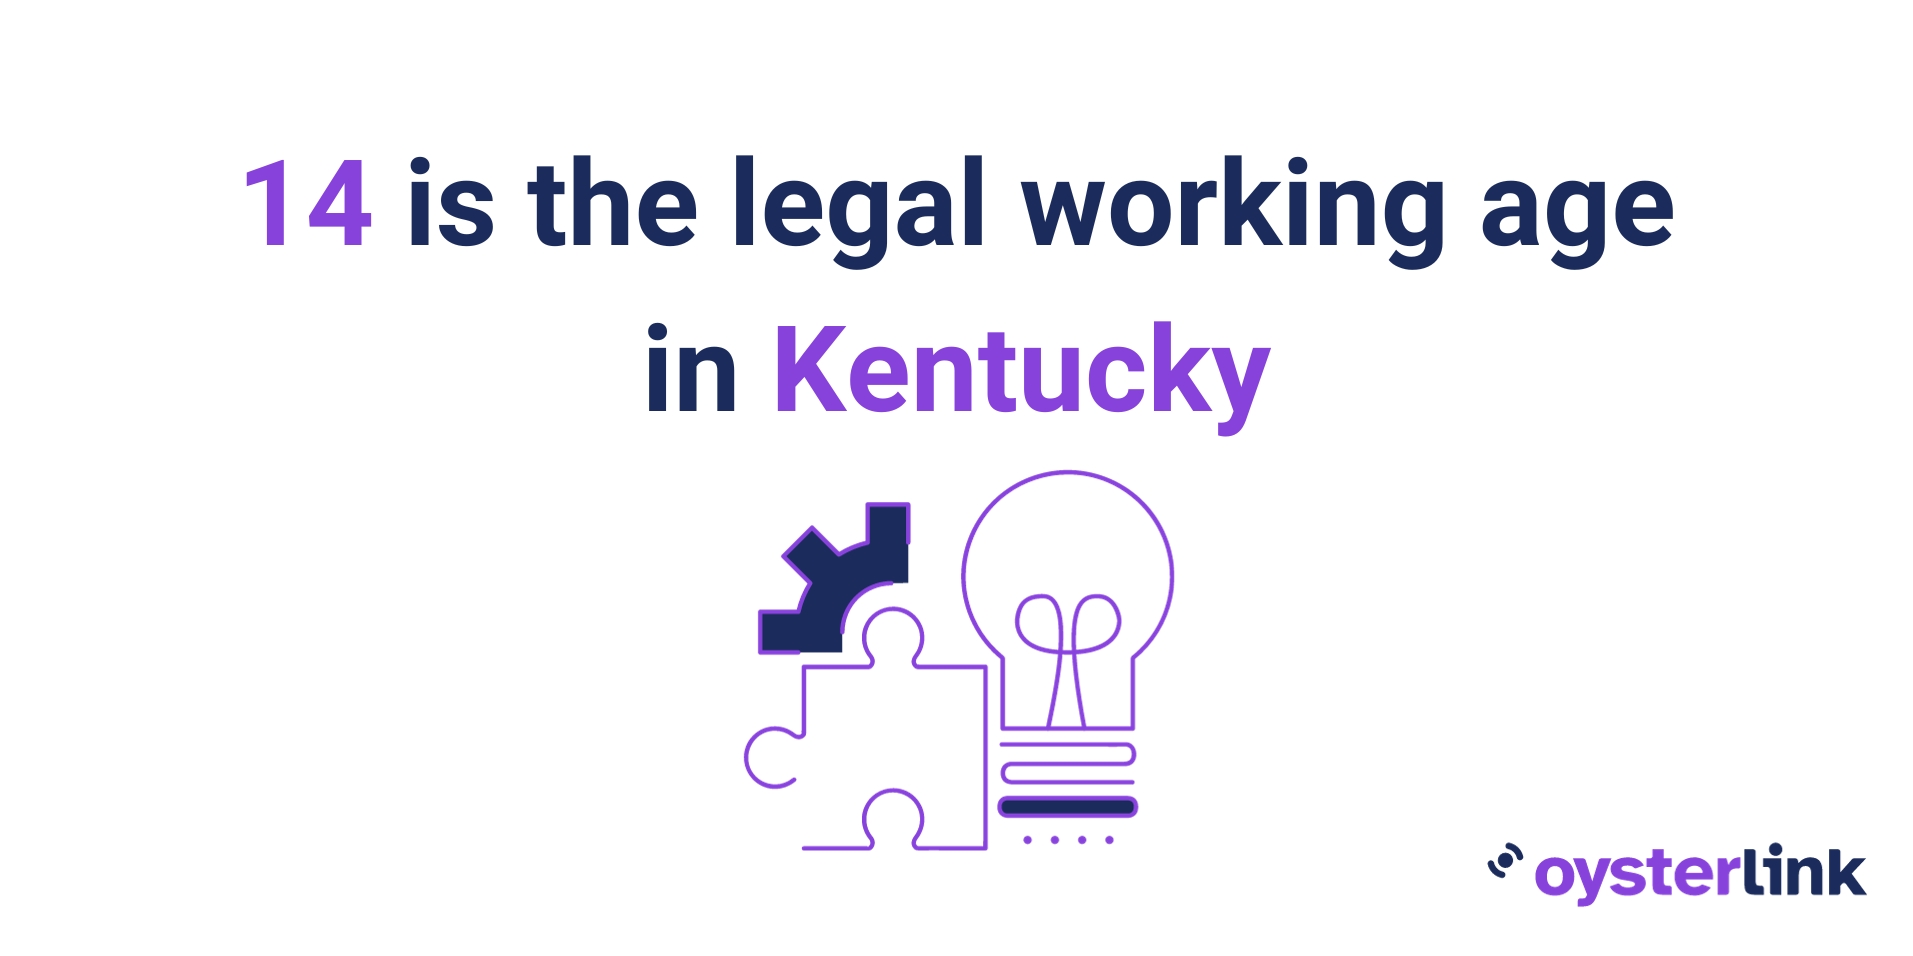 legal working age in Kentucky